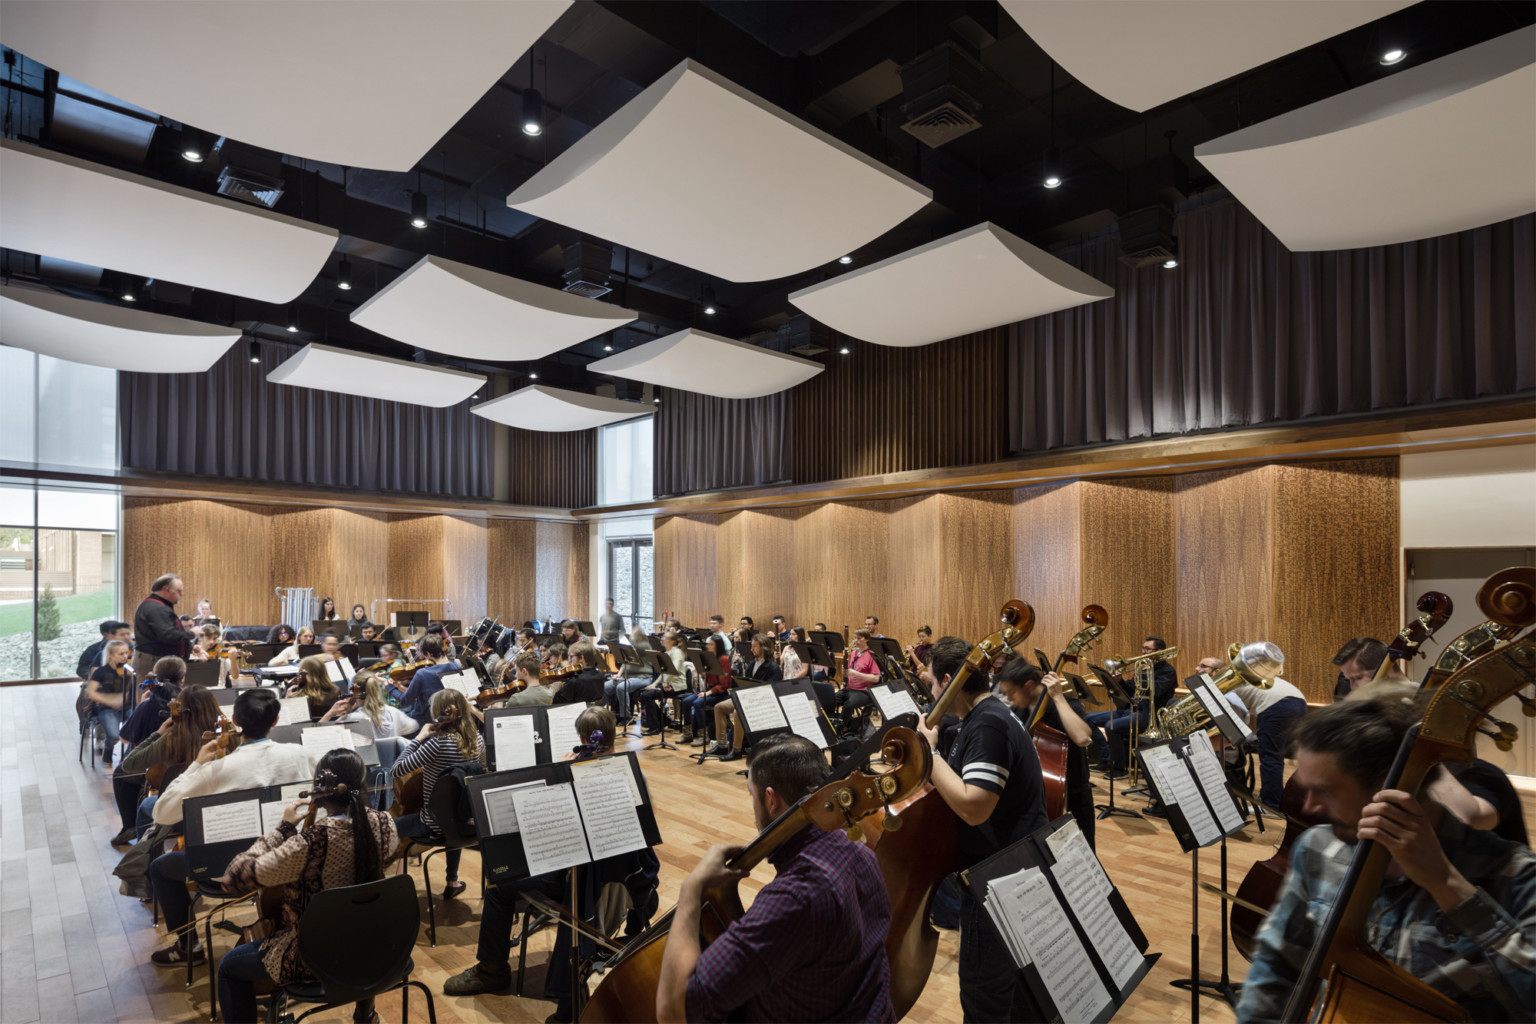 Student musicians rehearsing in studio with angled wood panels on the walls and white acoustical sound panels on the ceiling